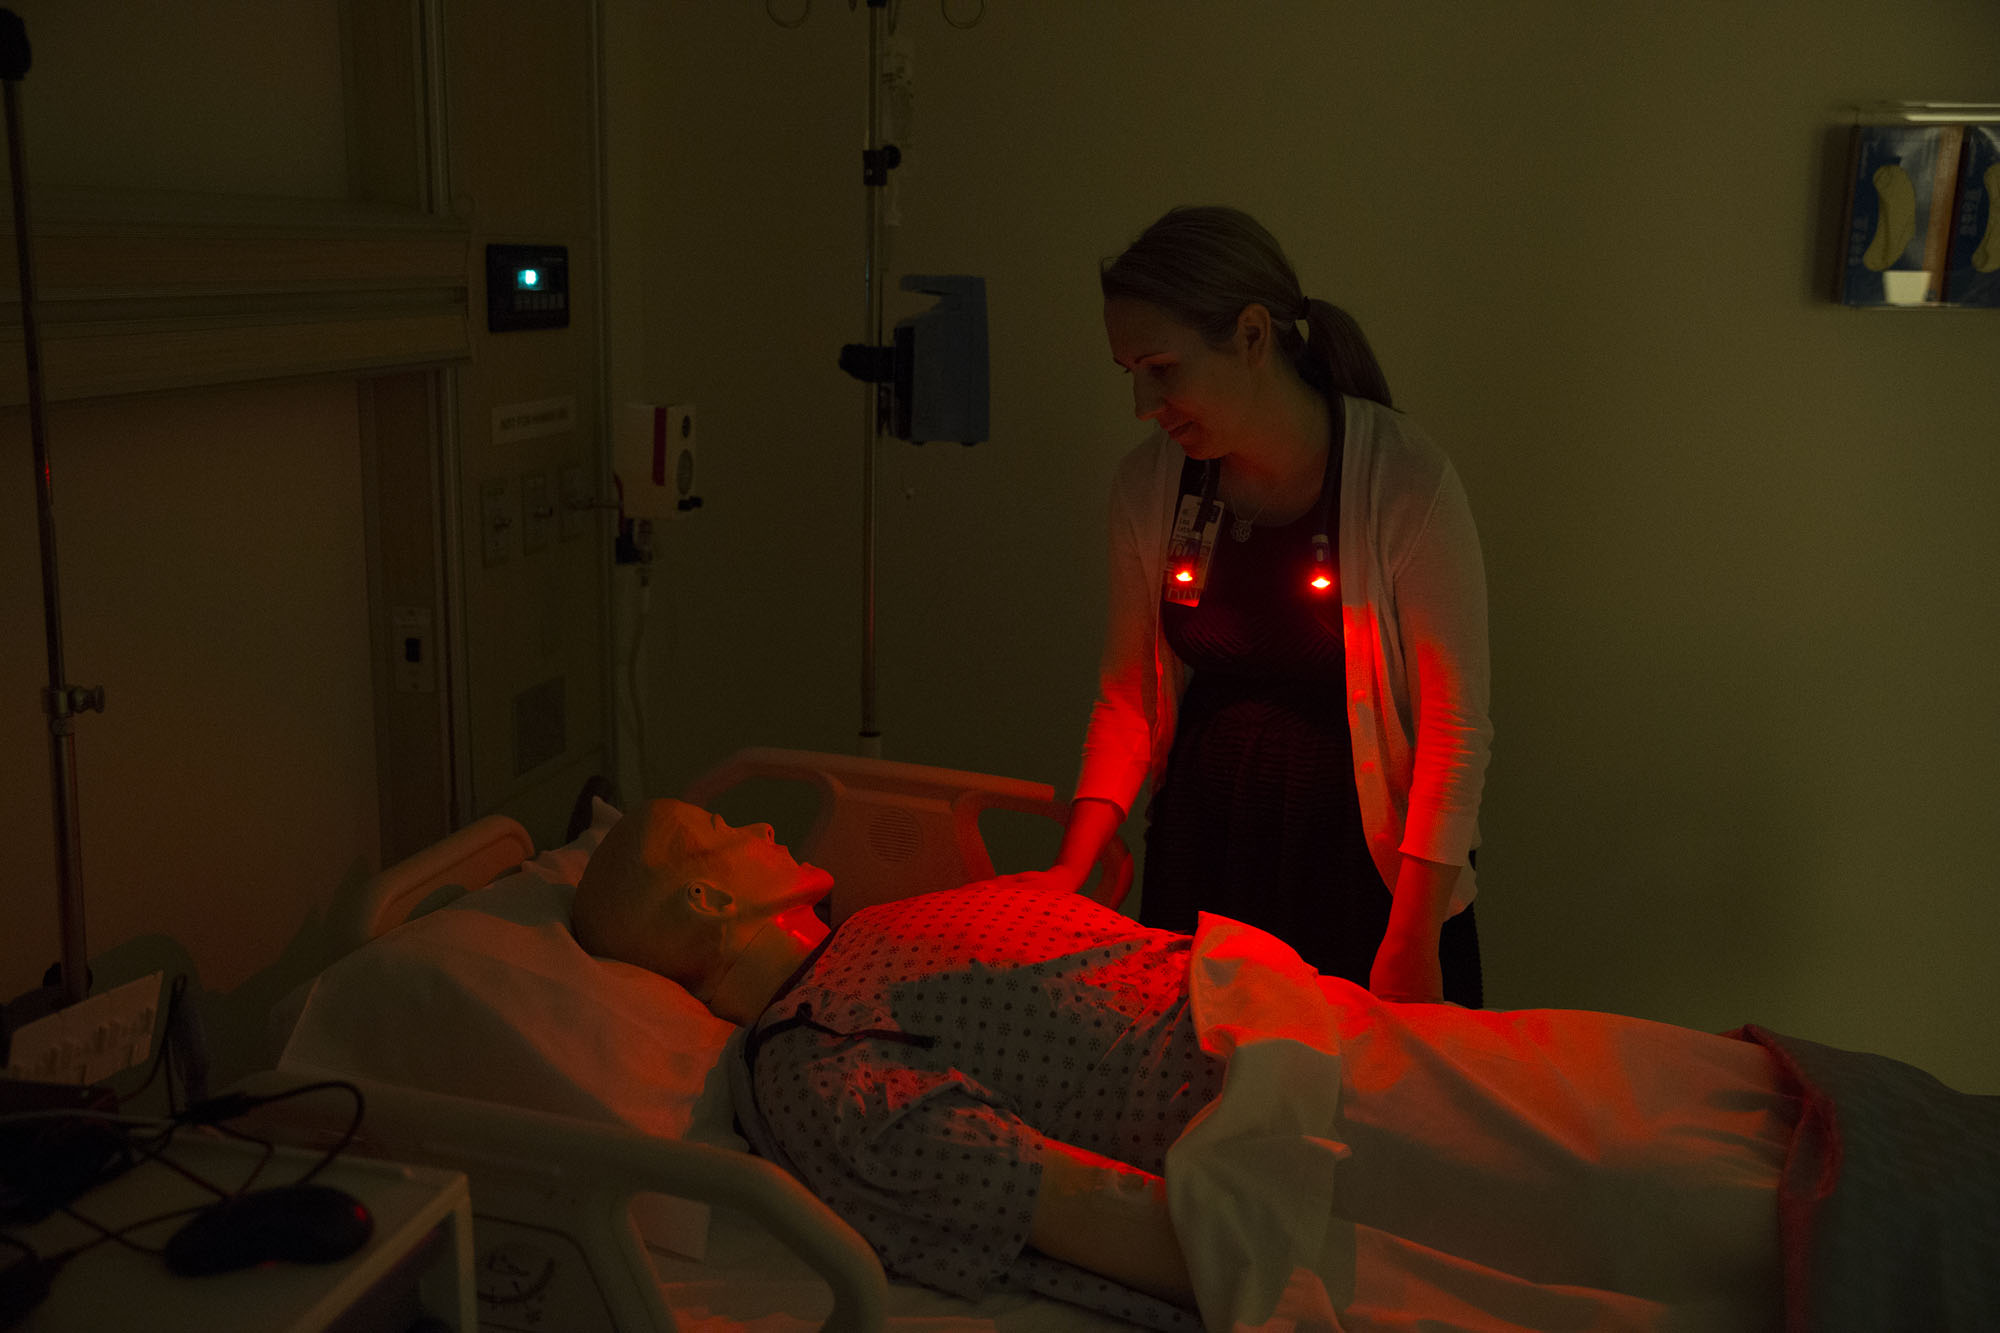 Lisa Letzkus, works with a dummy patient in a darkened room